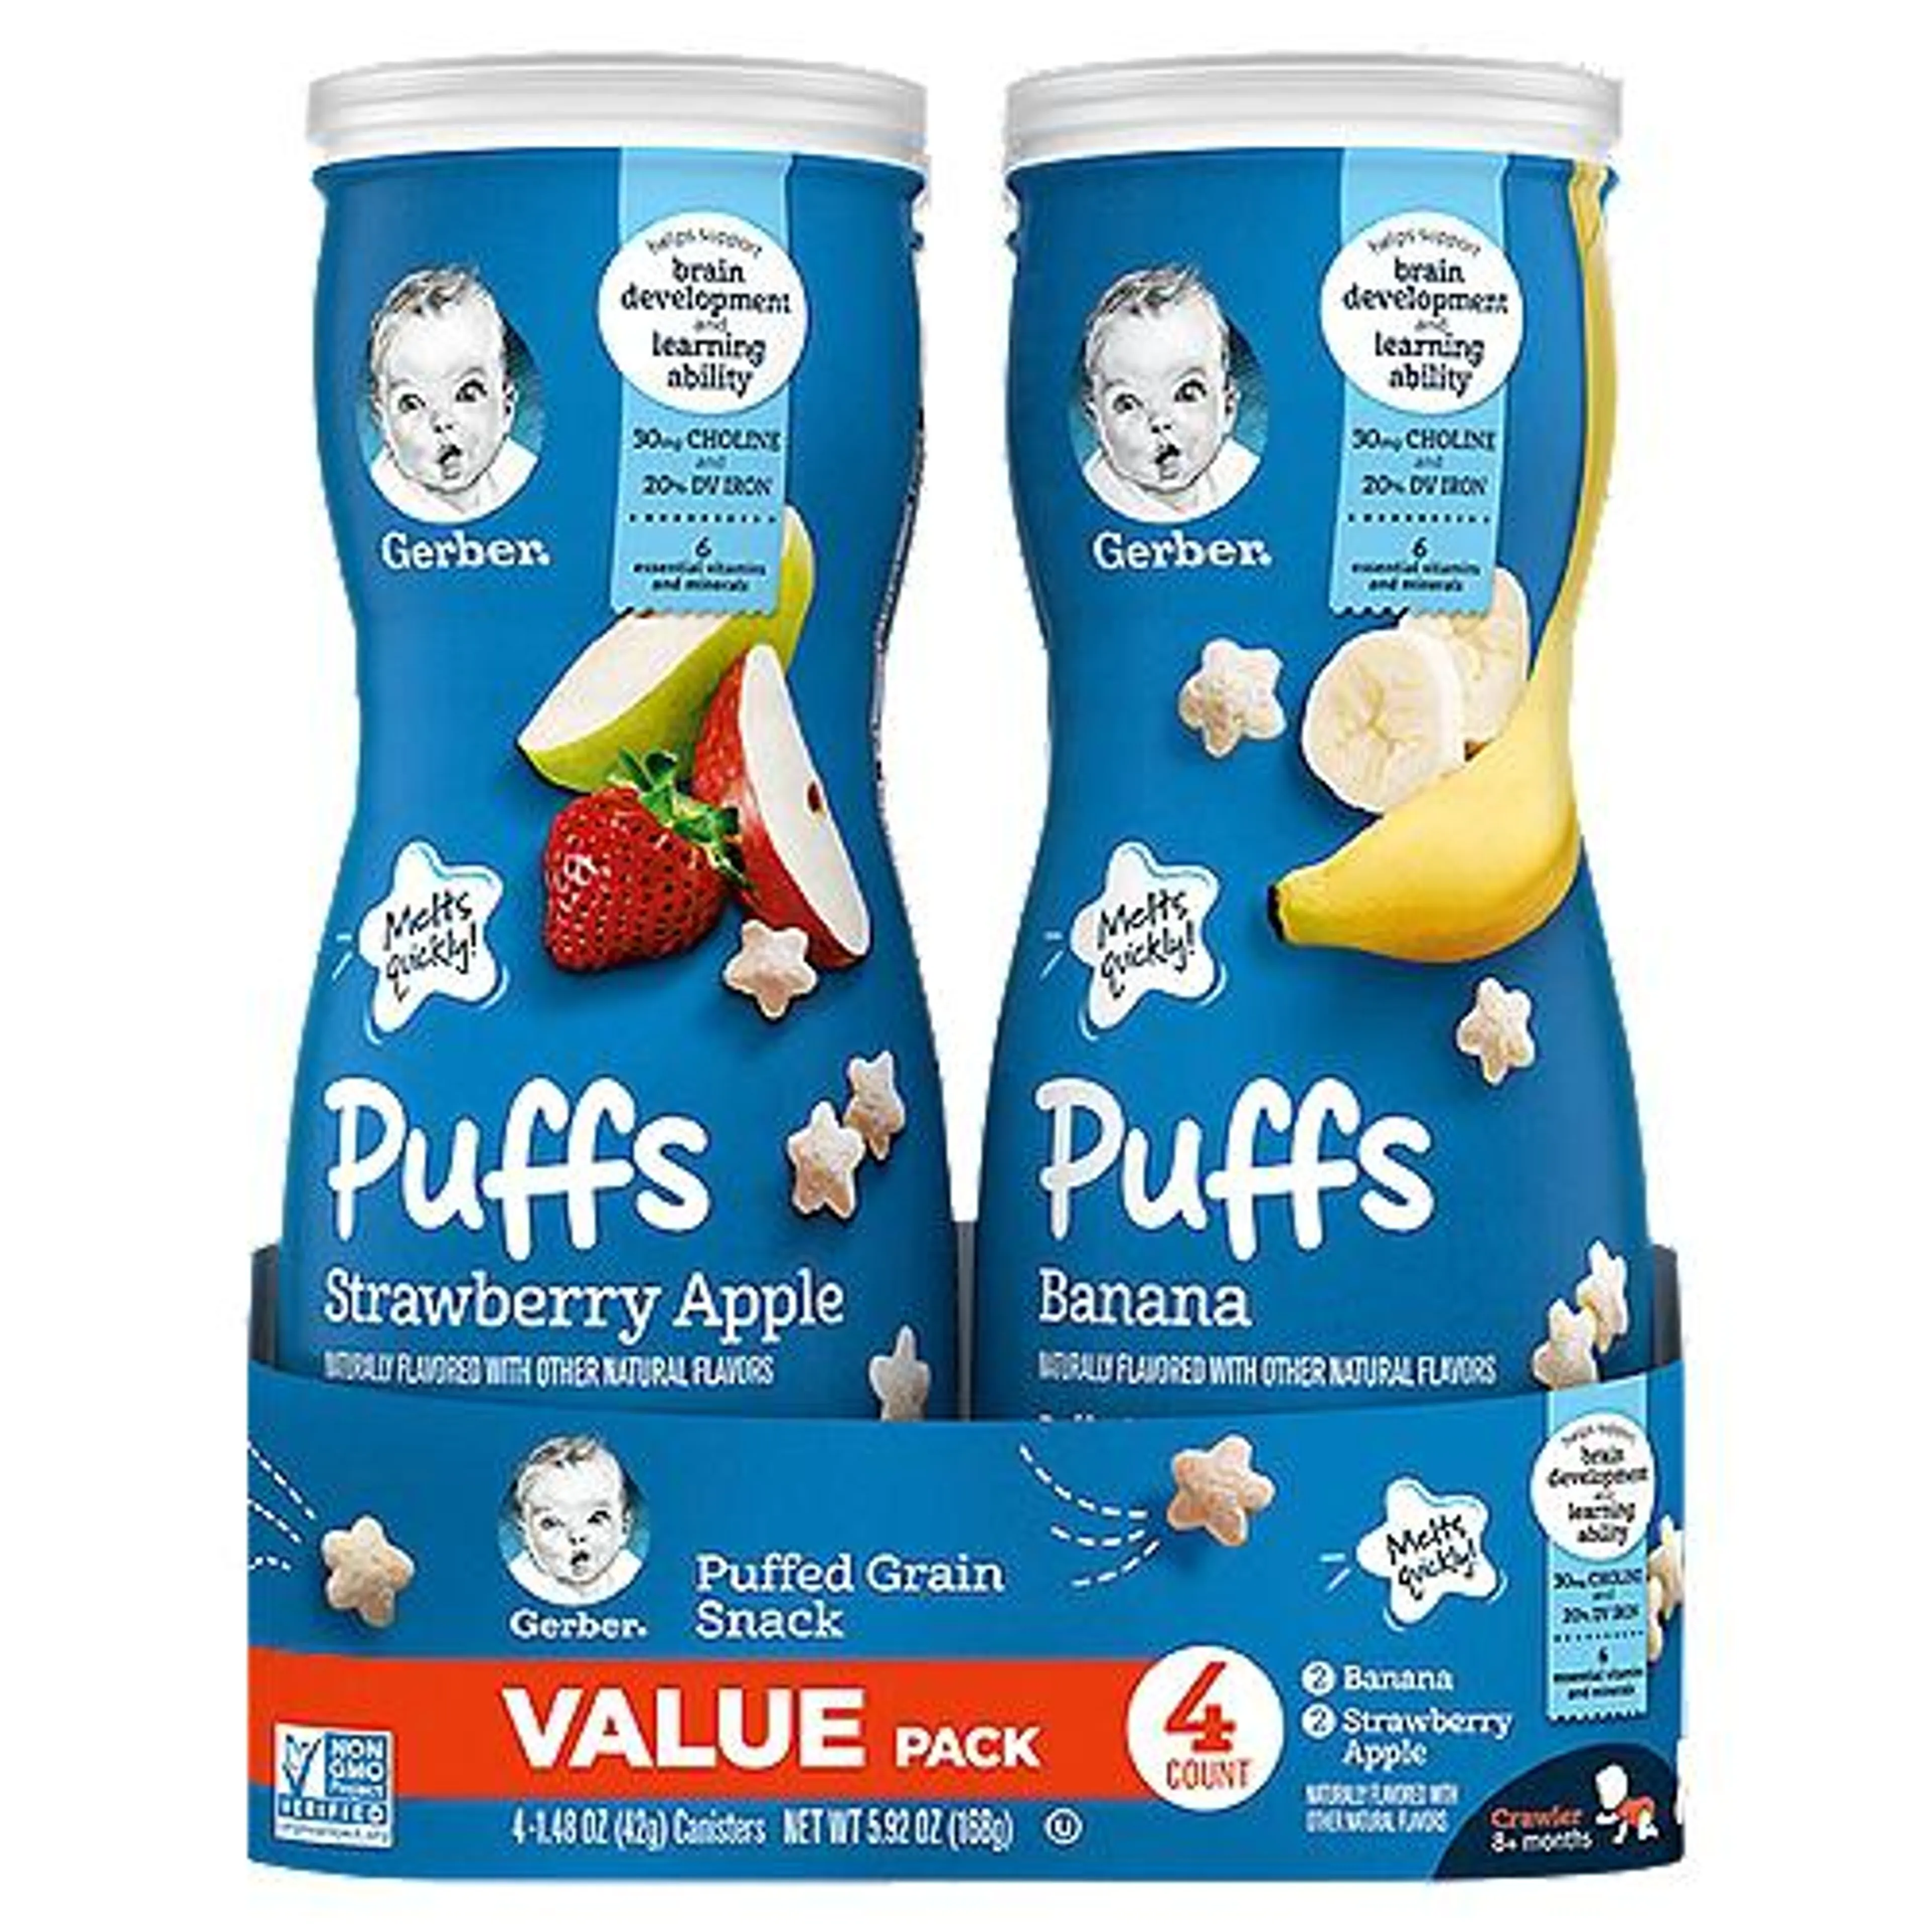 (Pack of 4) )Gerber Puffs Banana & Apple Strawberry Cereal Snacks Variety Pack, 1.48 oz